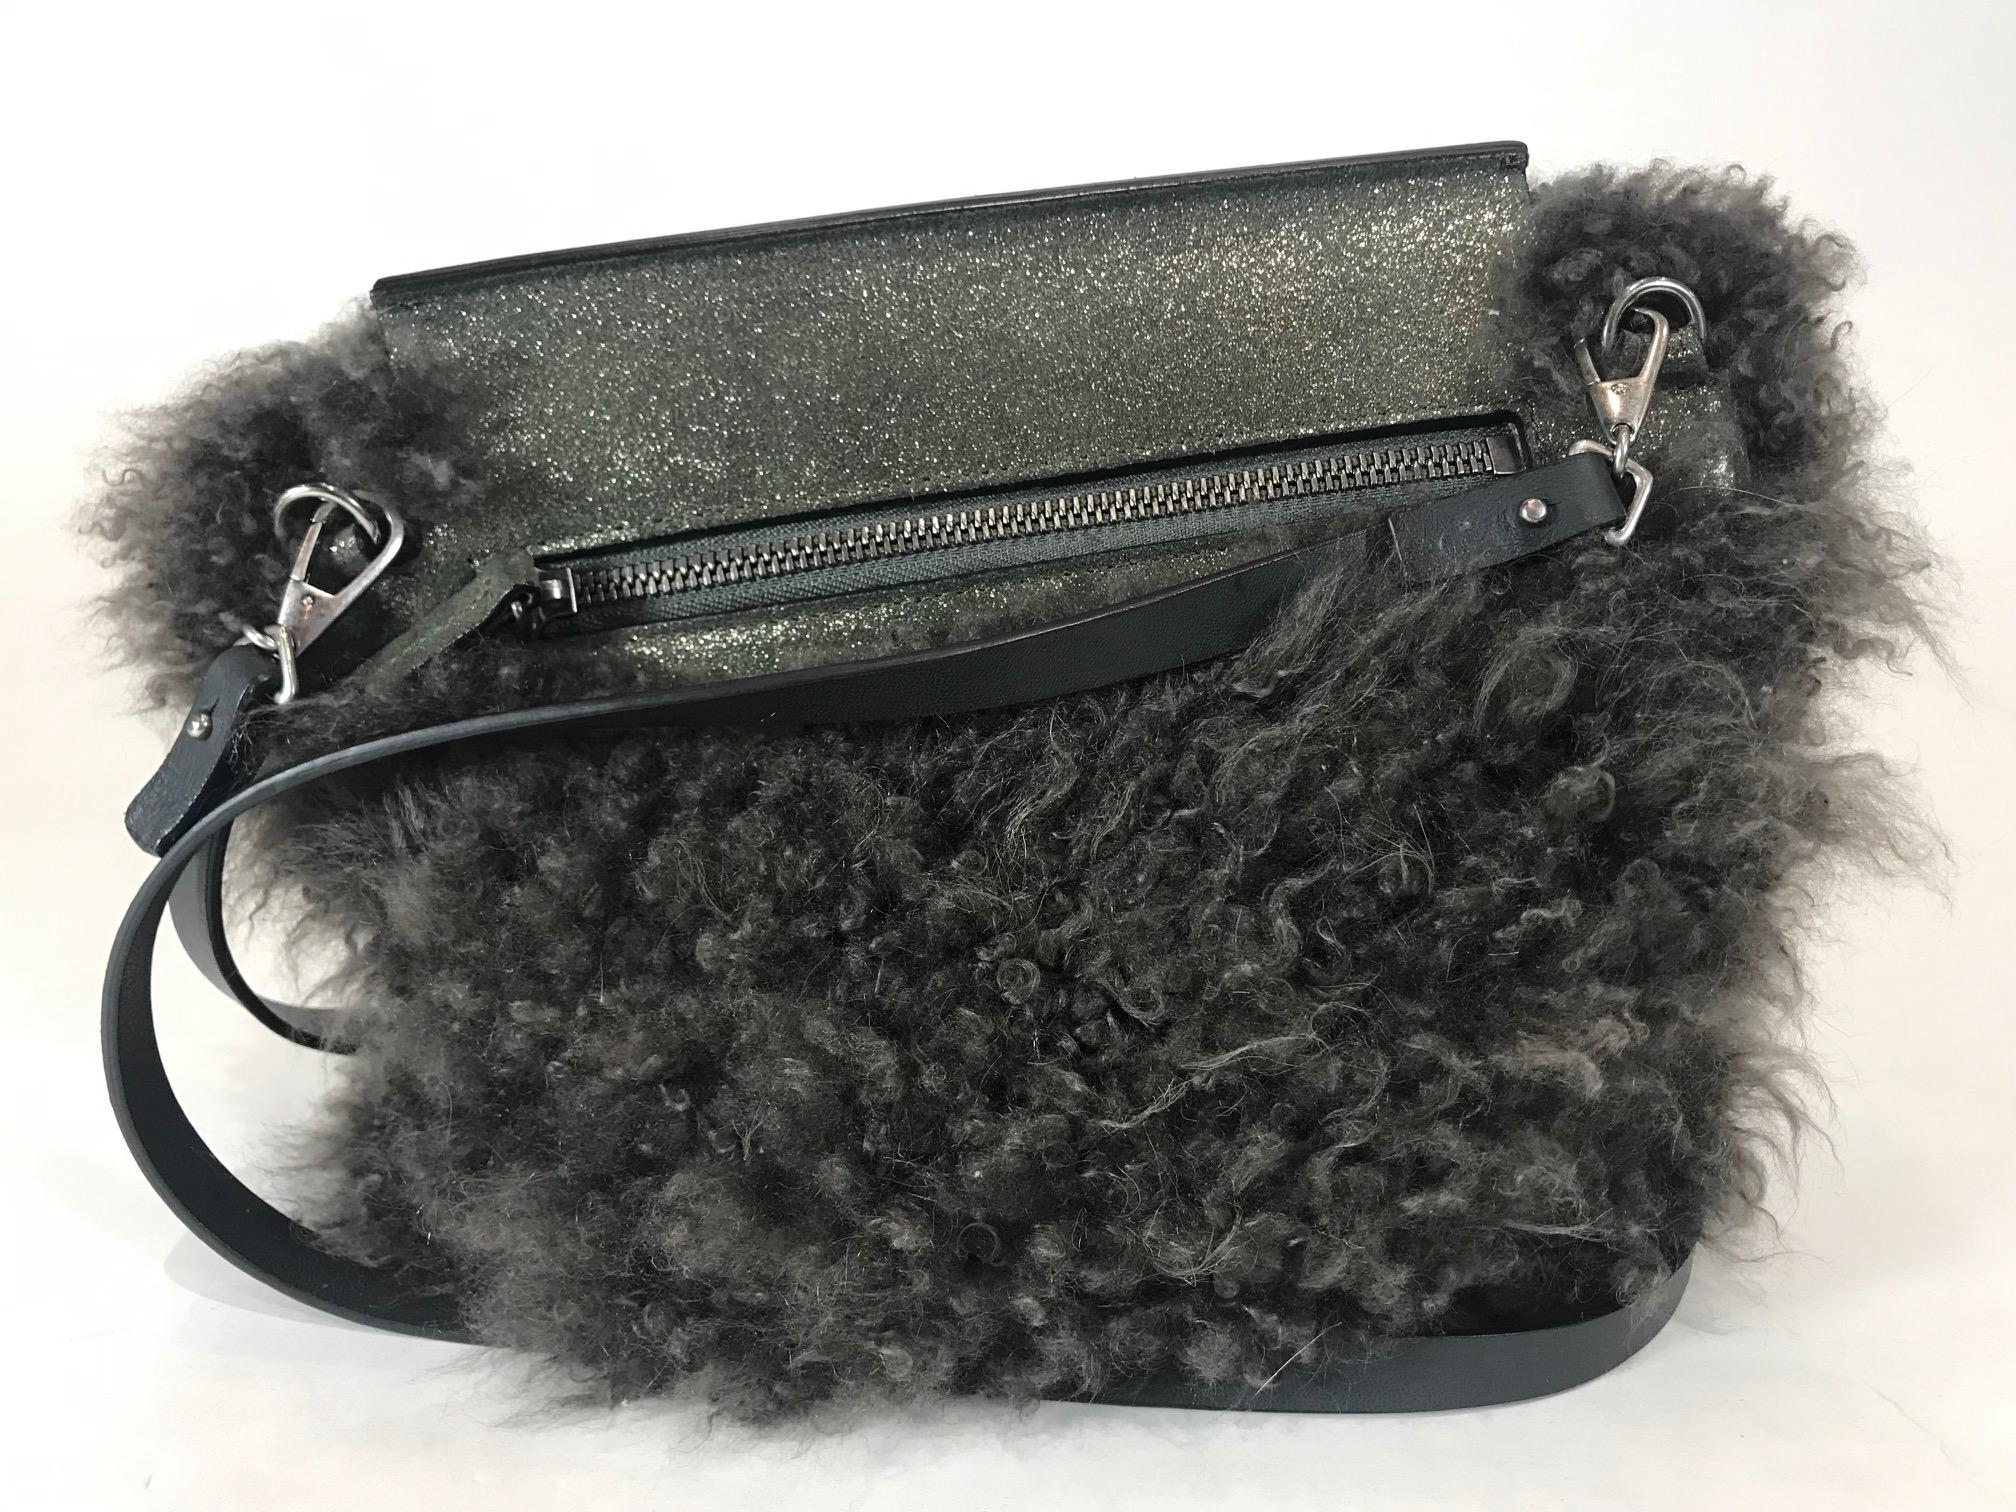 Brunello Cucinelli Shearling Crossbody Bag In Excellent Condition For Sale In Roslyn, NY